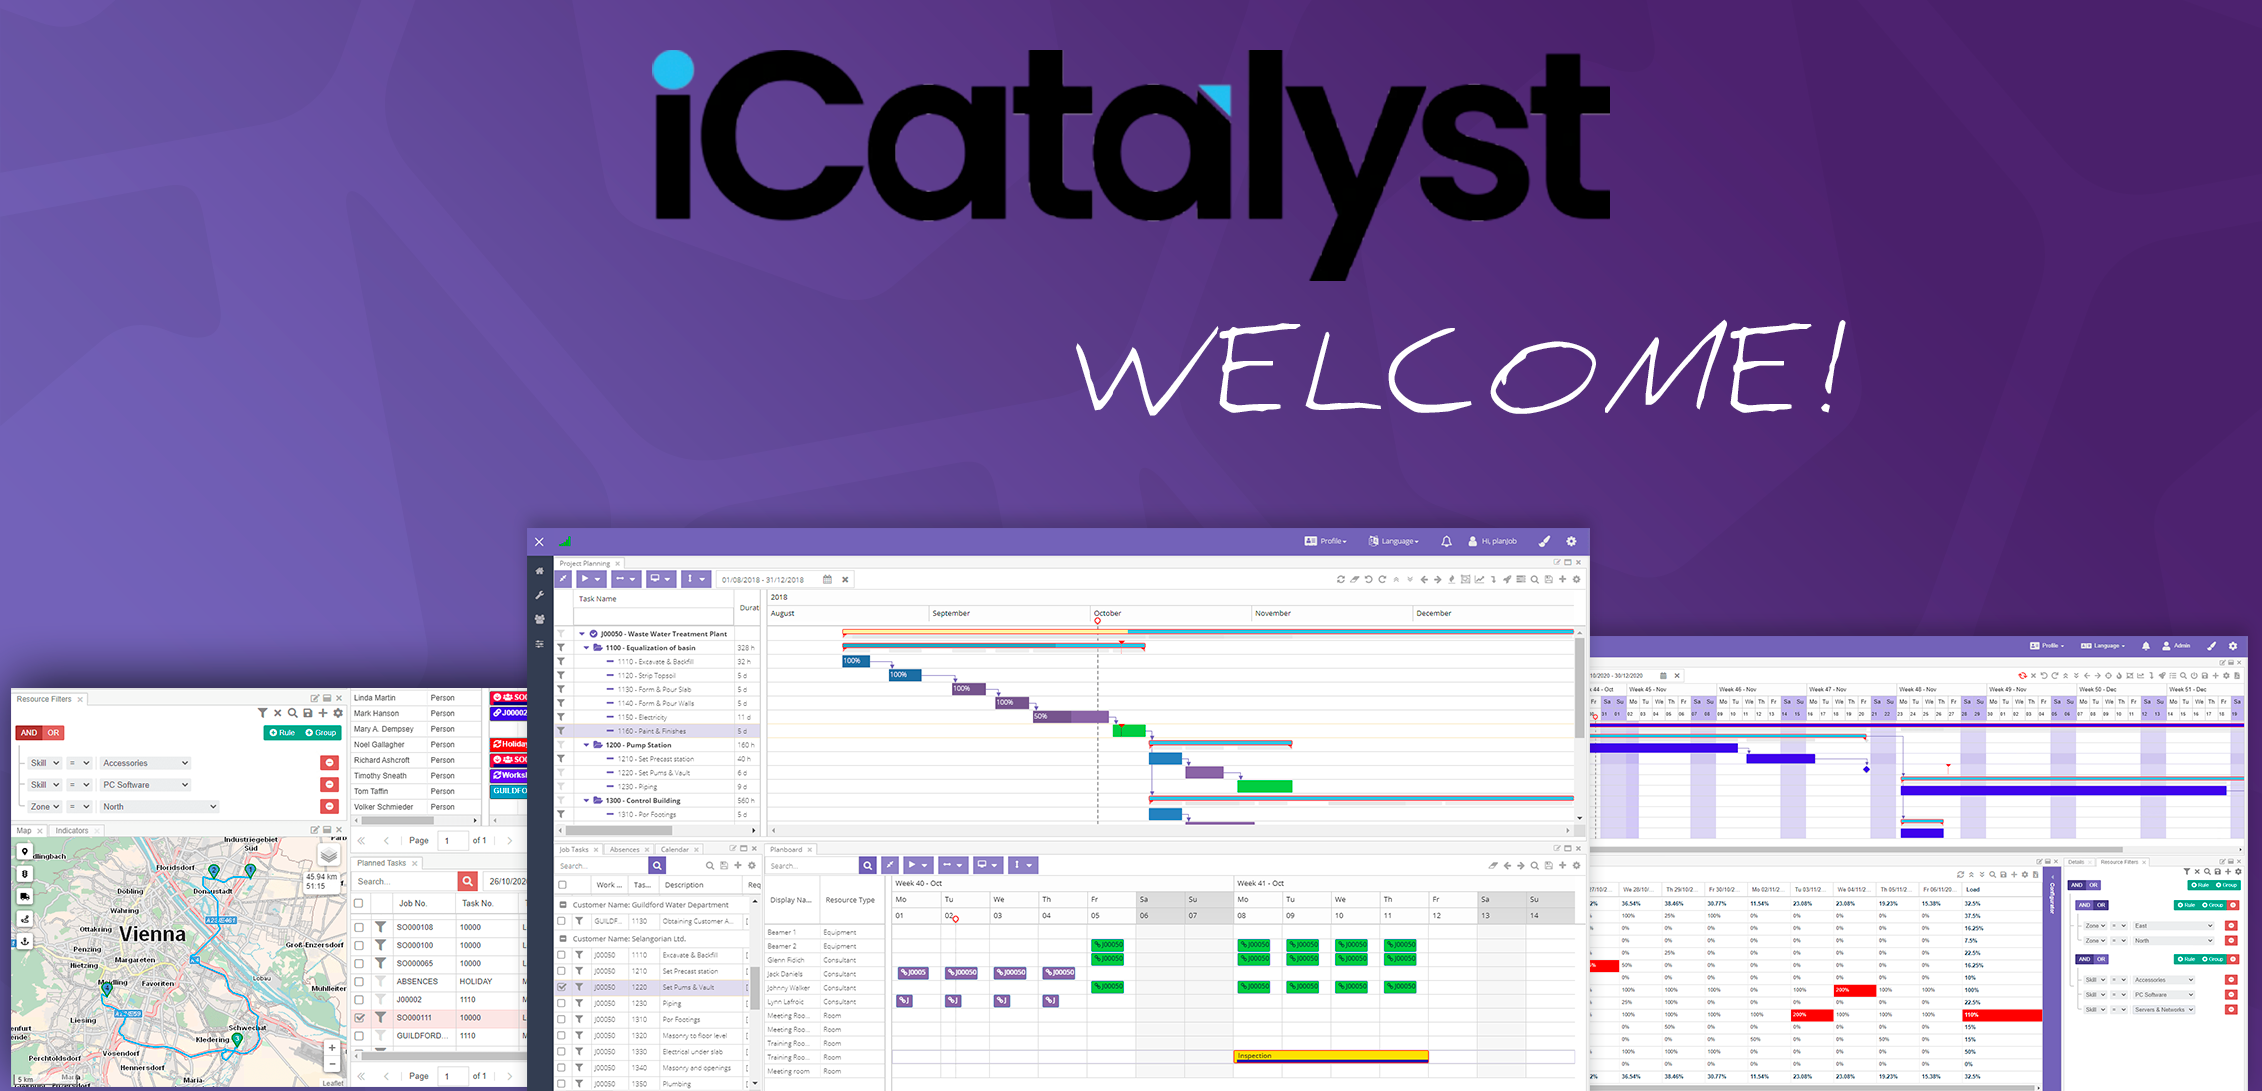 ds-reseller-icatalyst-welcome.png